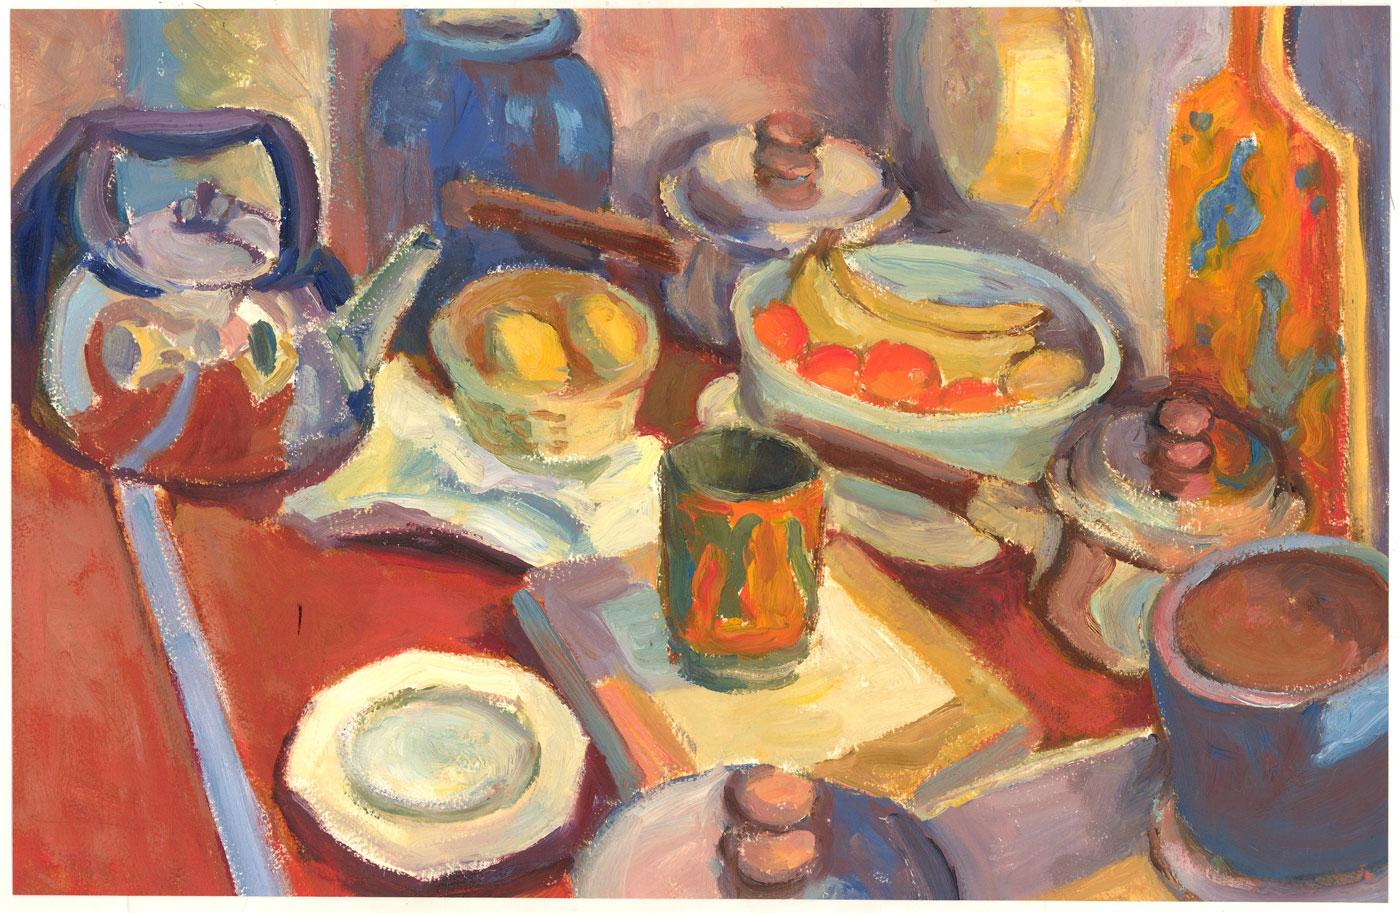 An energetic and rich palette is combined with meandering impasto brush marks to breathe life and vigor into this impressionistic depiction of a cluttered kitchen countertop.

On the reverse is an equally alluring watercolour still life study, which